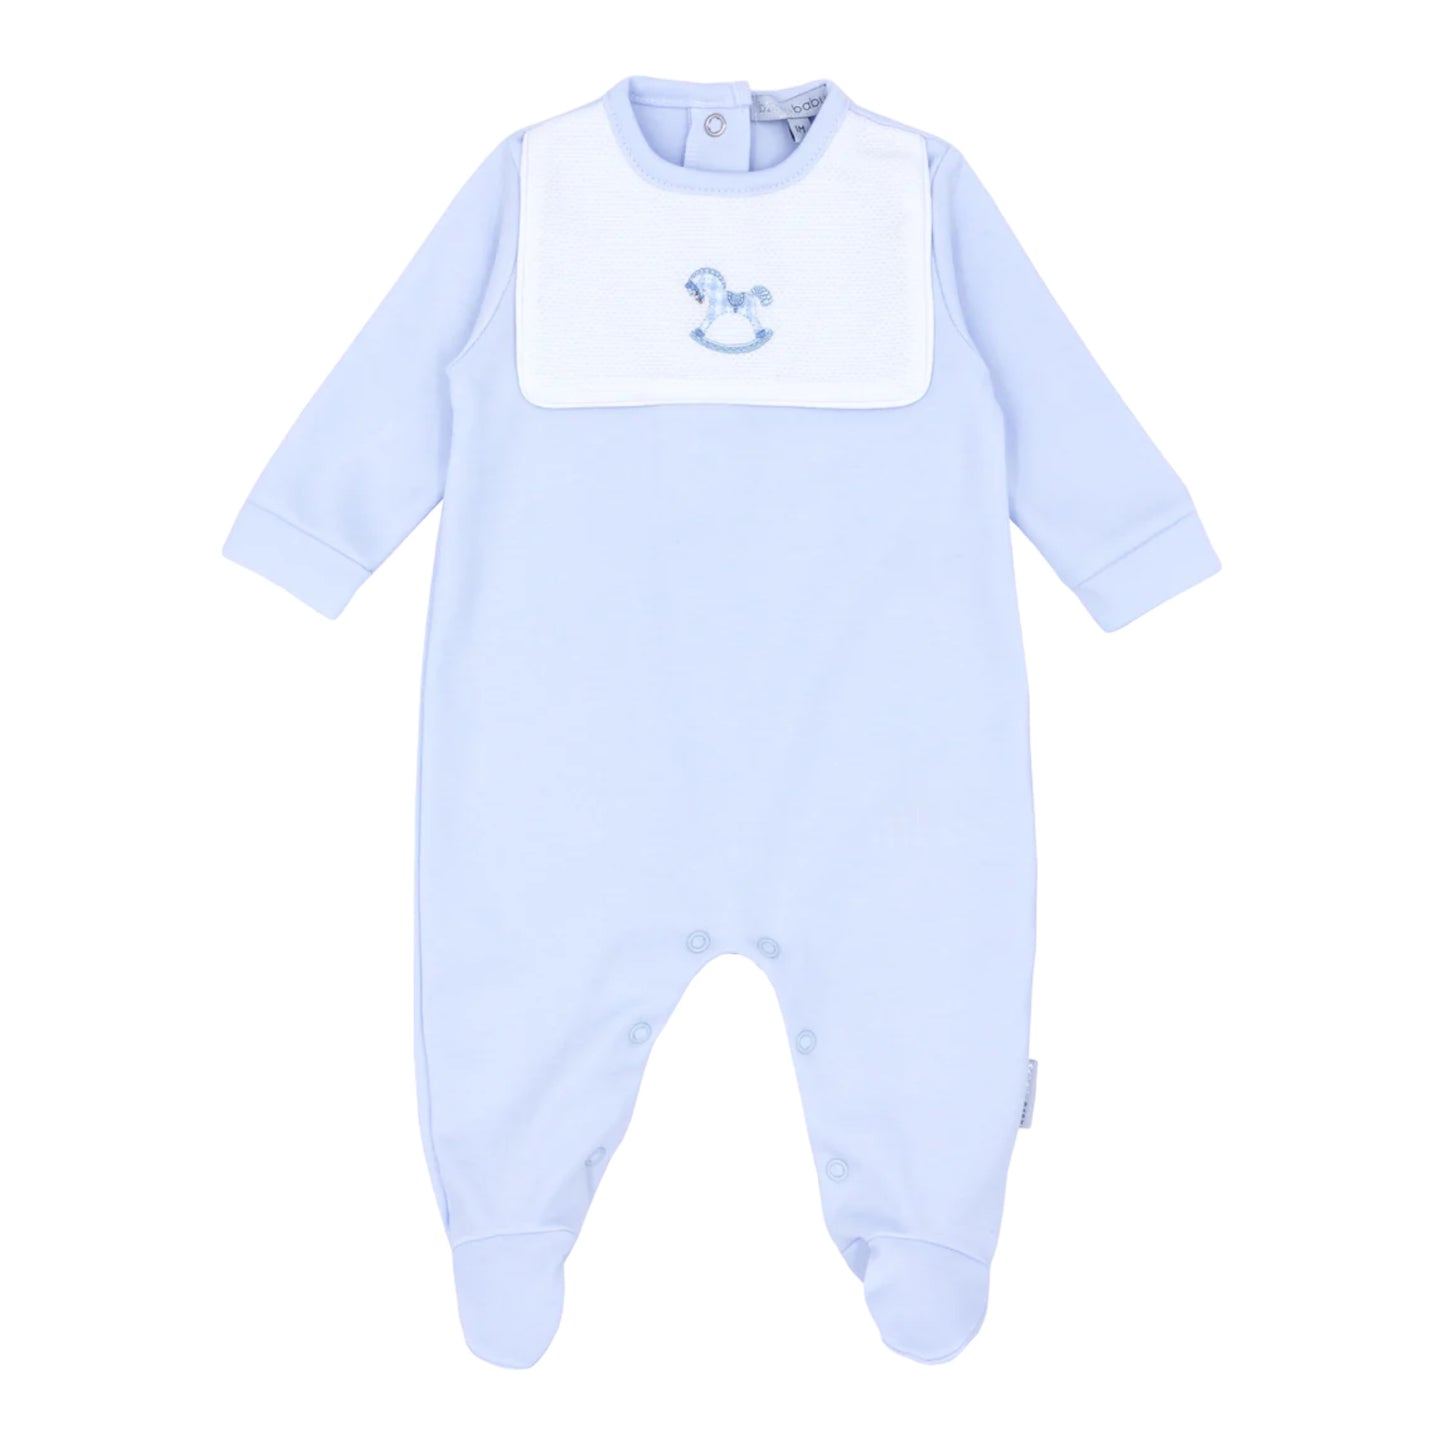 blues baby, All in ones, blues baby - white all in one romper, rocking horse